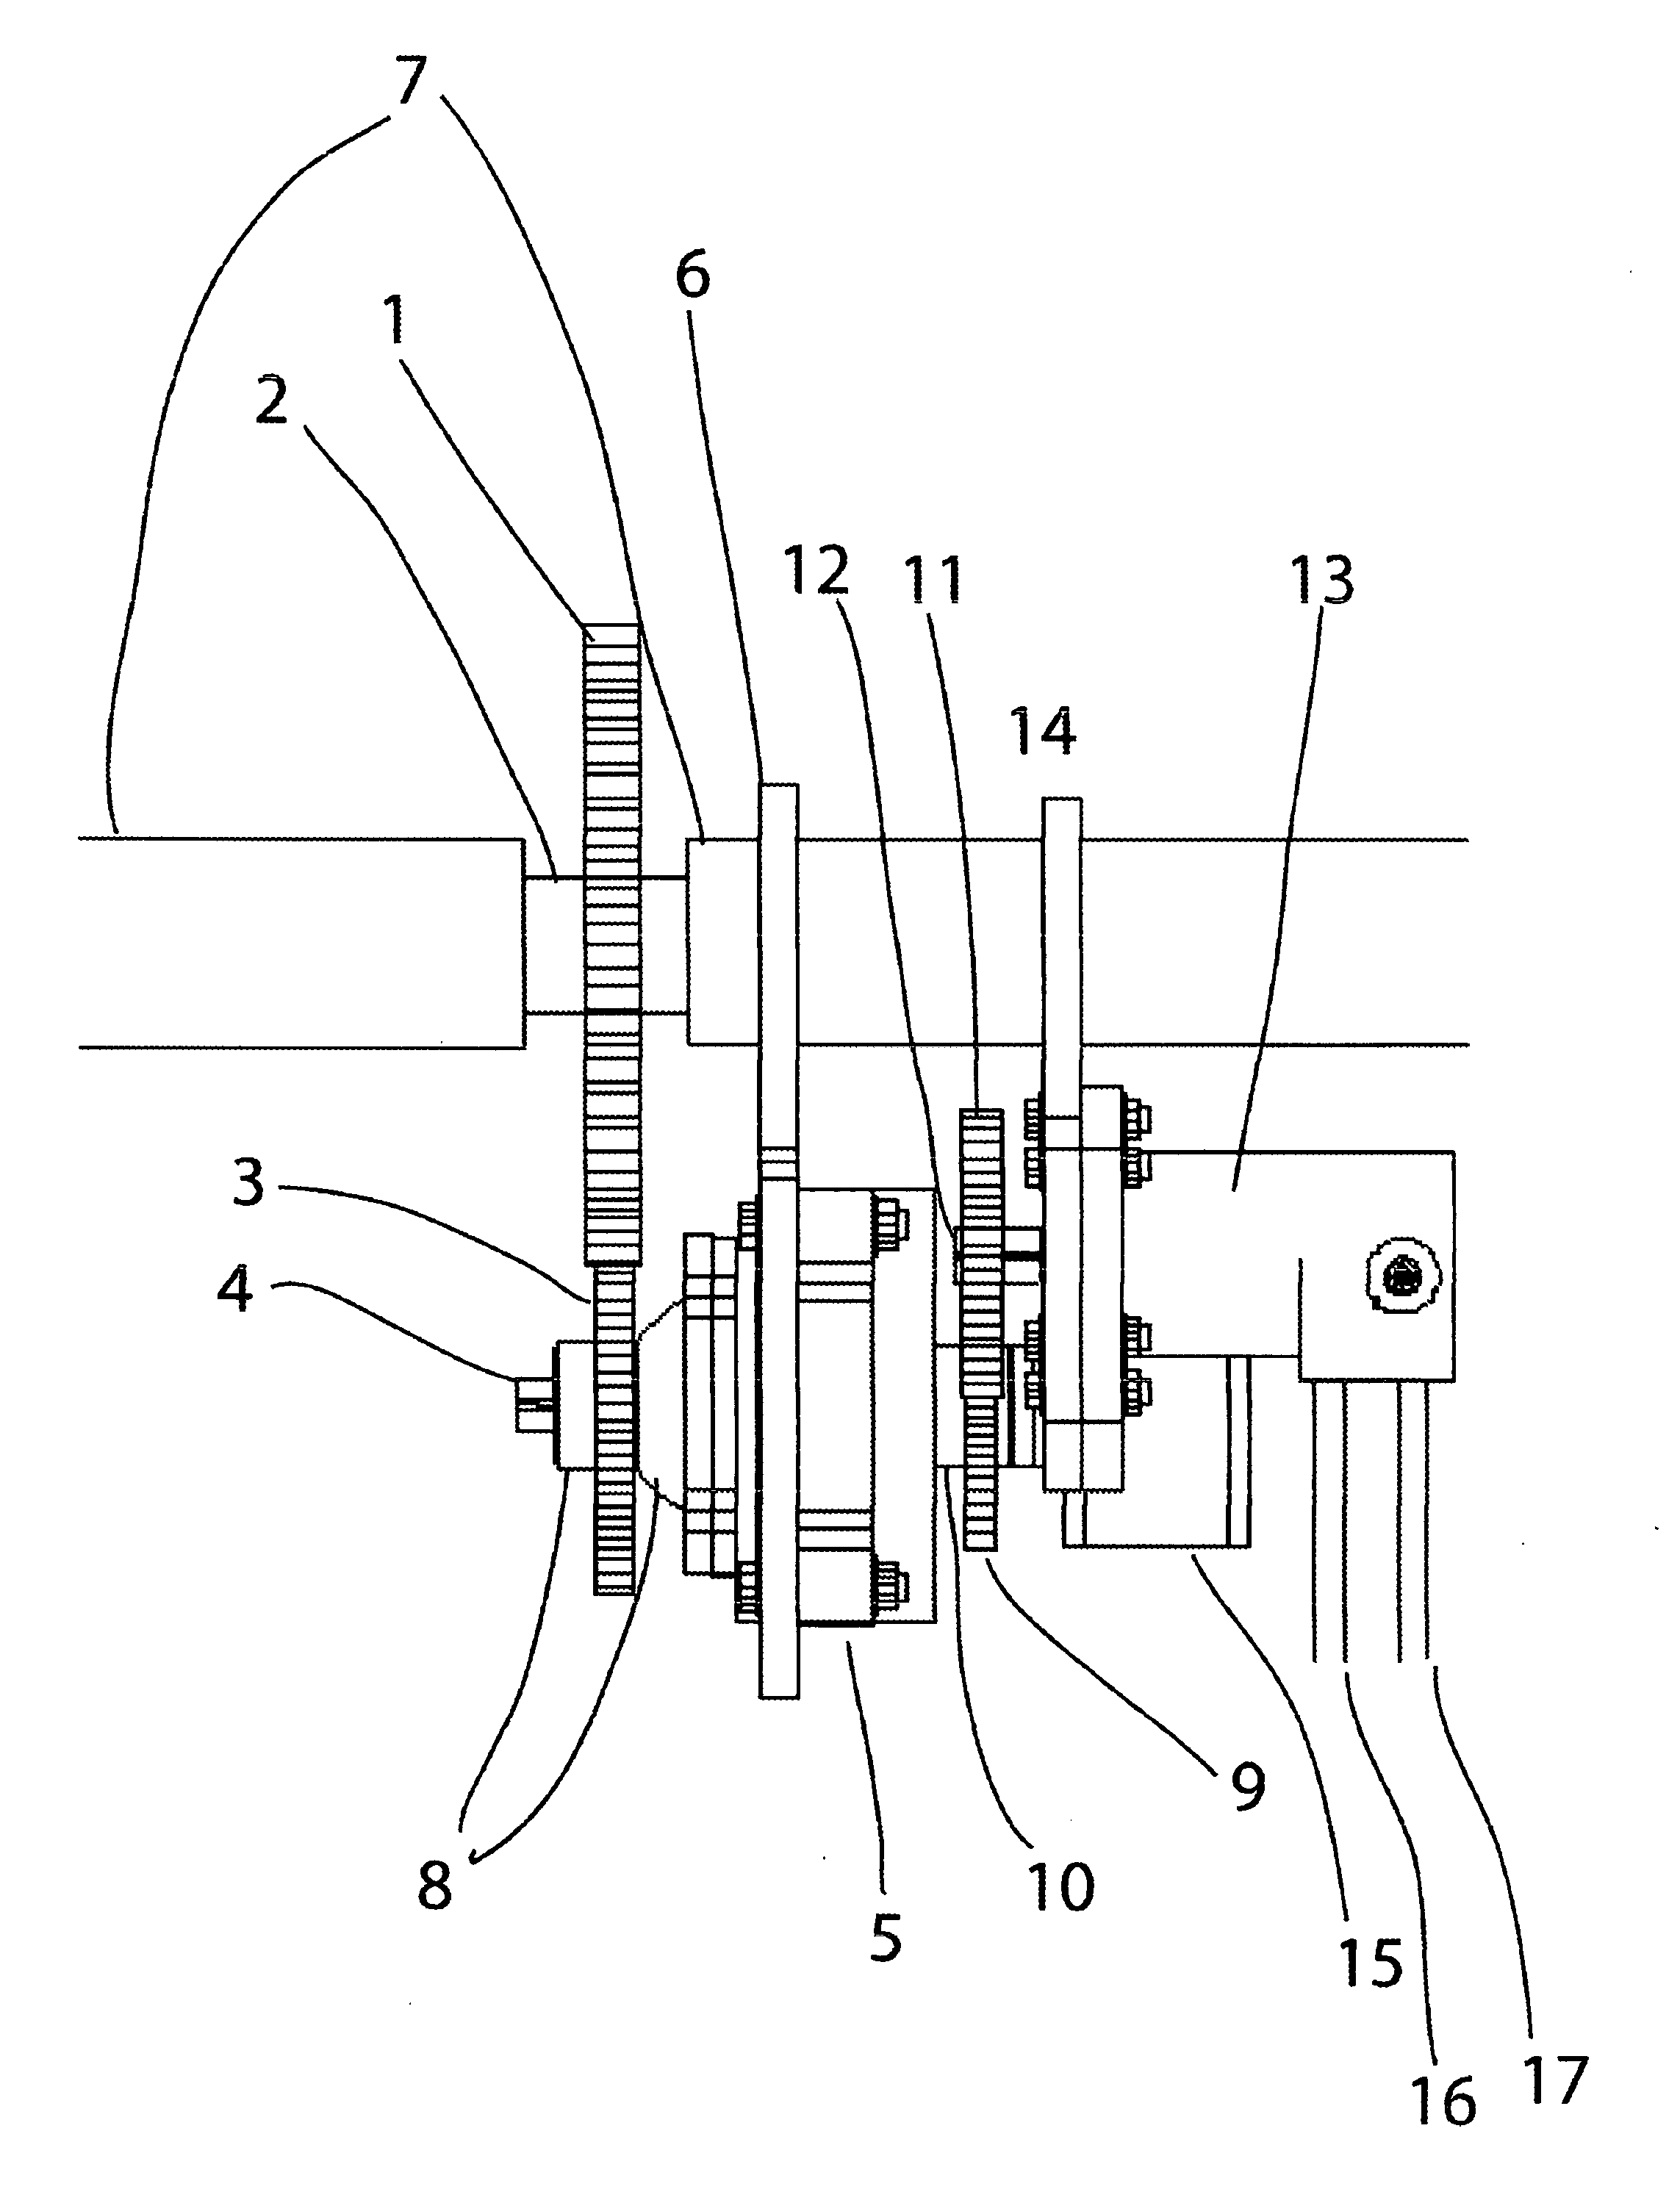 Hydraulic braking system that provides acceleration assistance and battery recharging